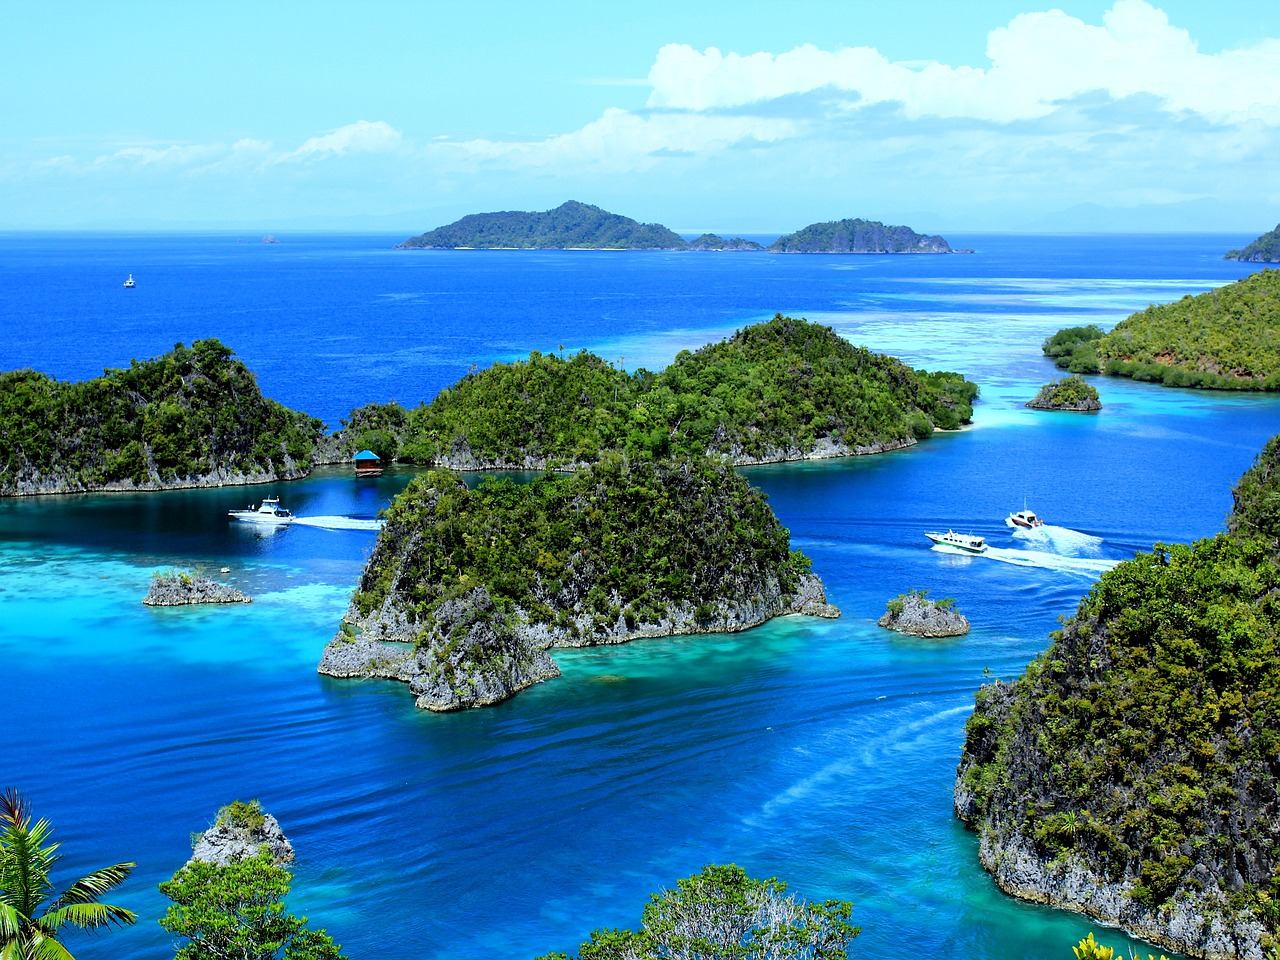 Luxurious 21-Day Journey through Indonesia: Raja Ampat, Bali, Lombok, and More